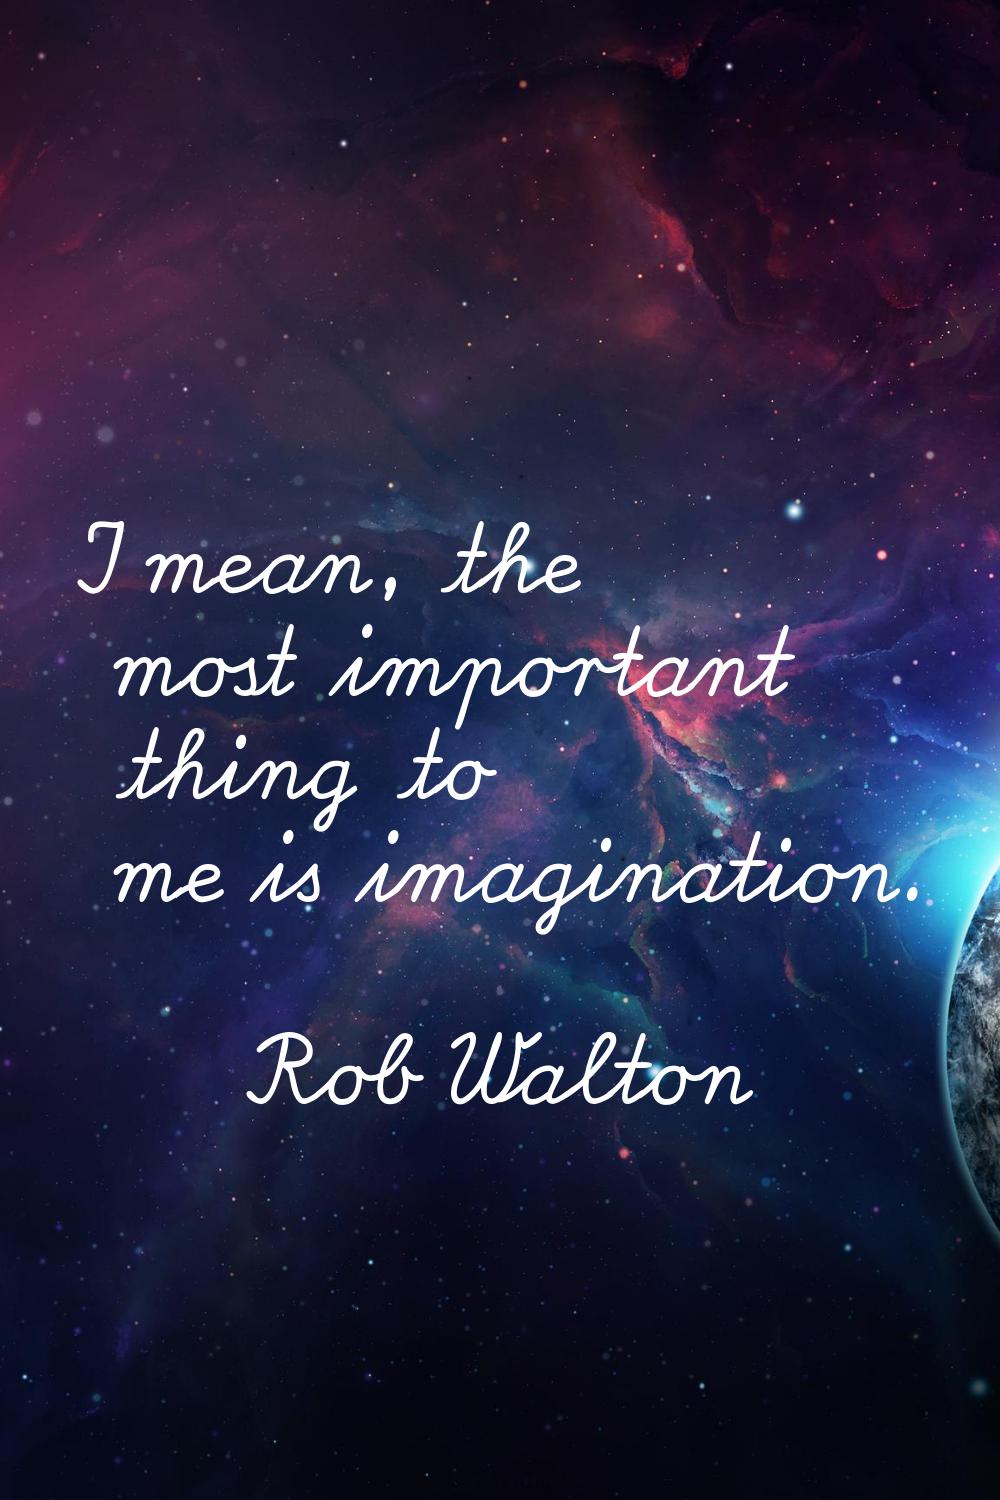 I mean, the most important thing to me is imagination.